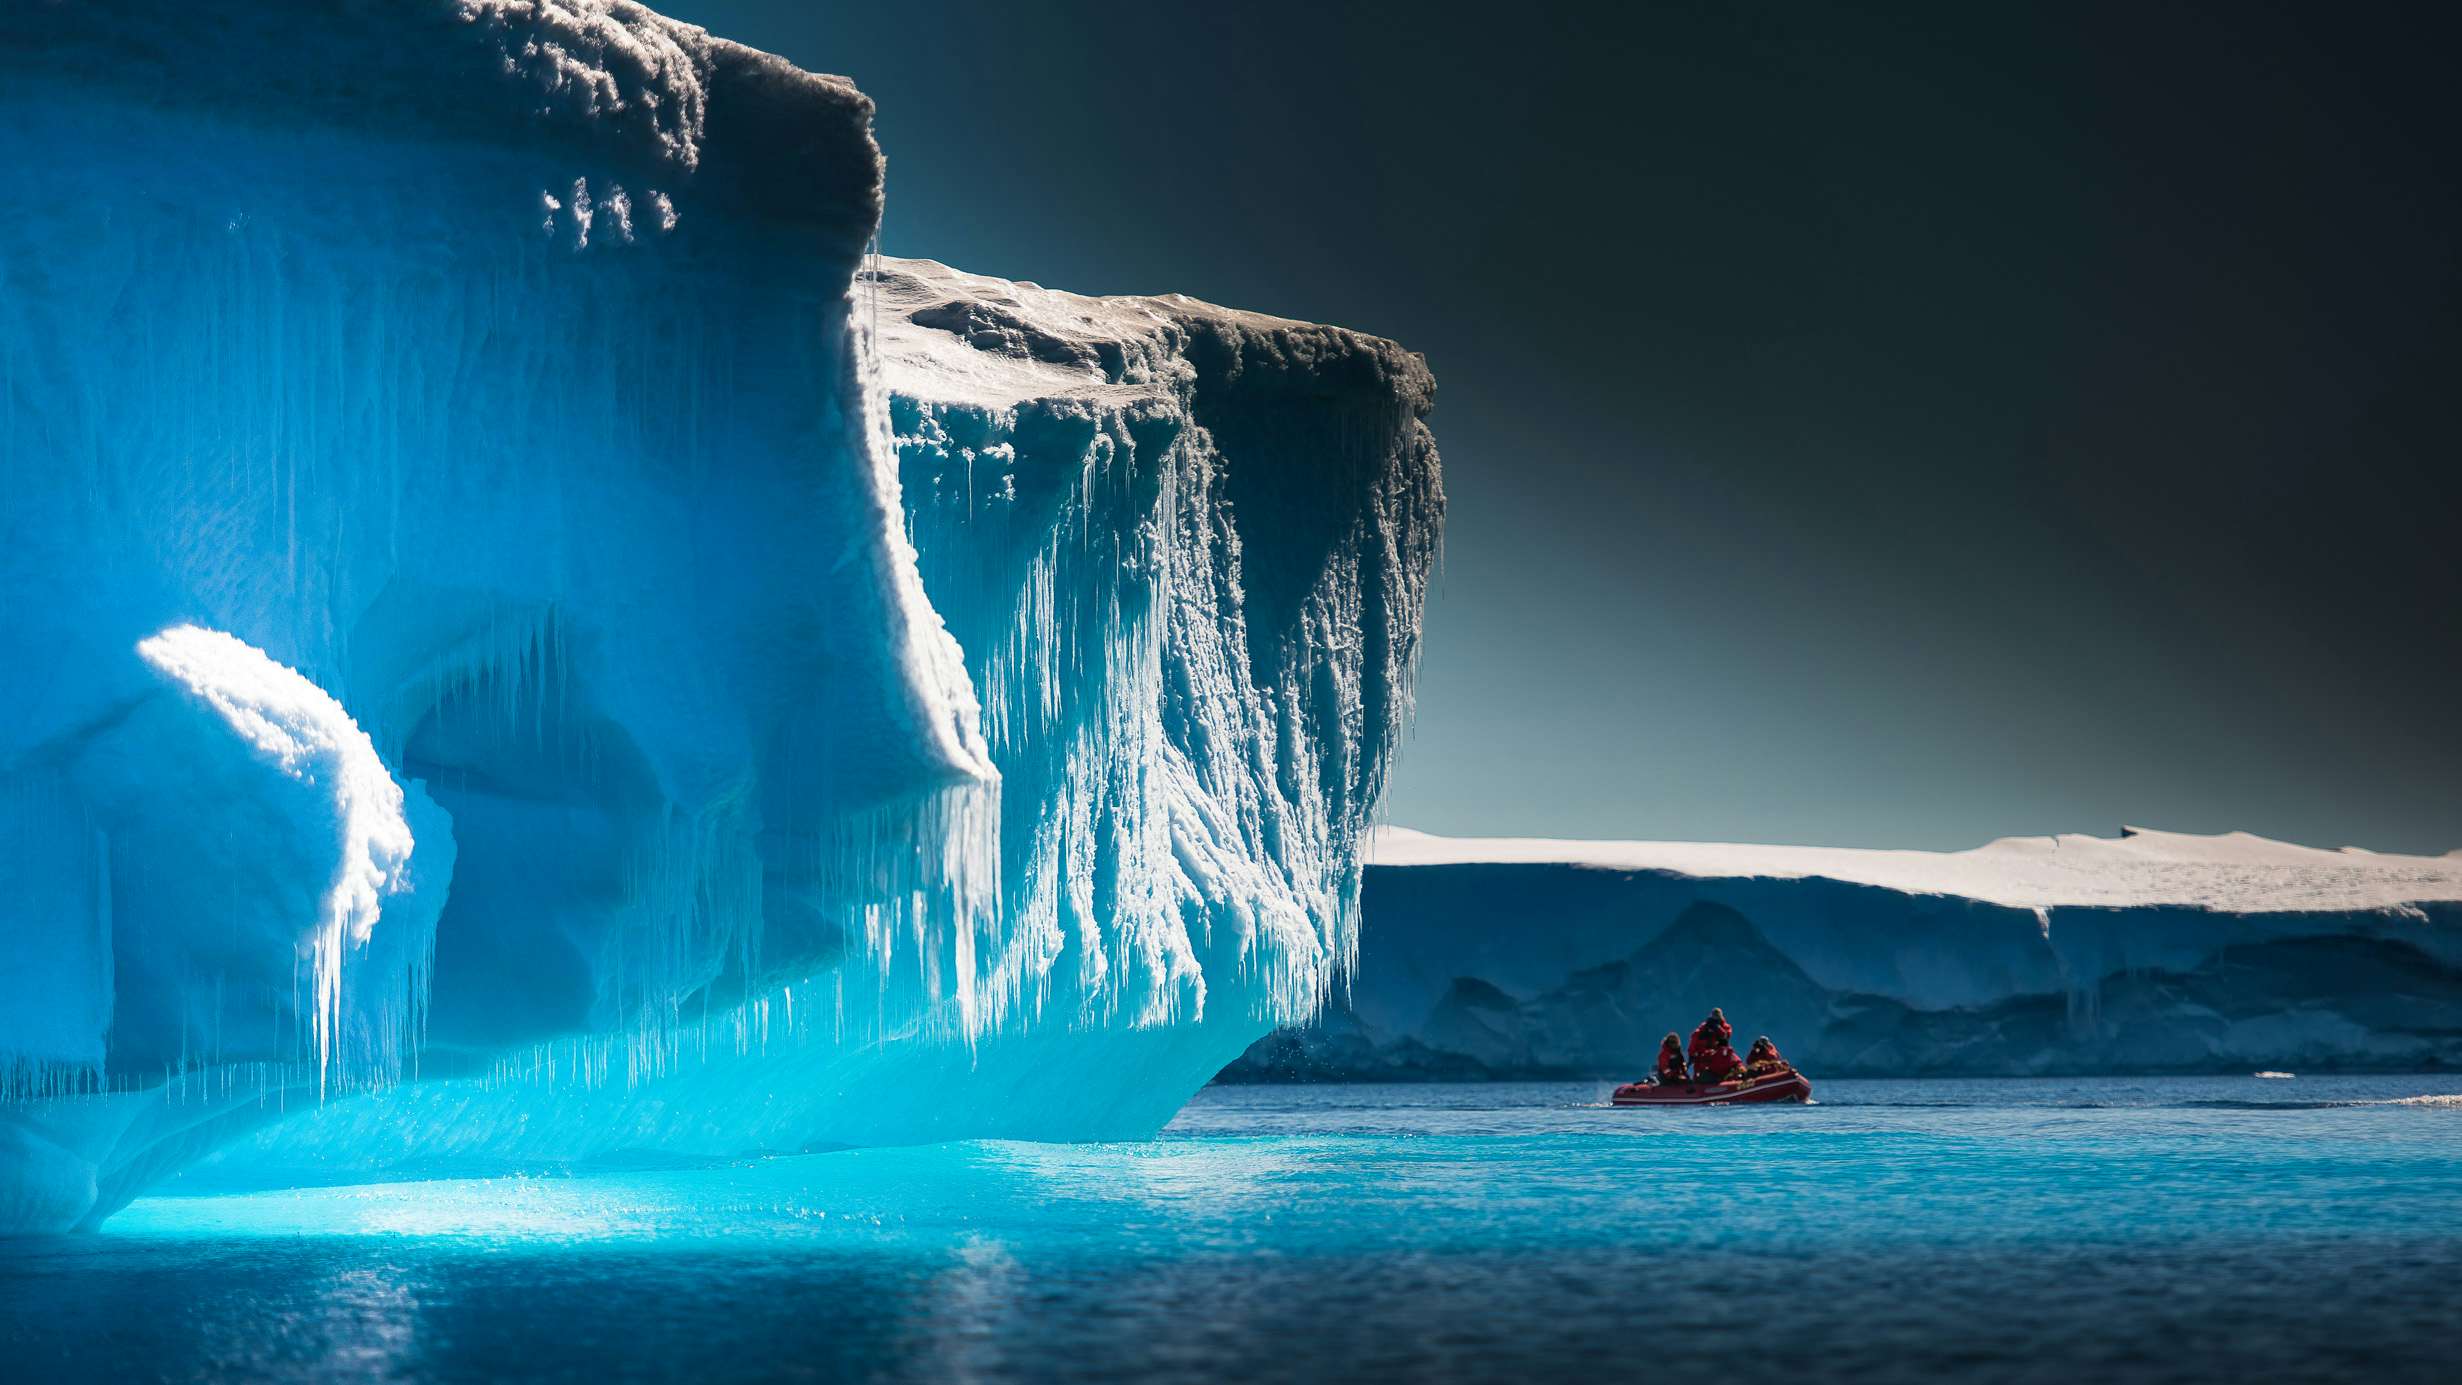 Antarctica Yacht Charter - Antarctica, icebergs with an inflatable boat, beautiful dramatic scenery